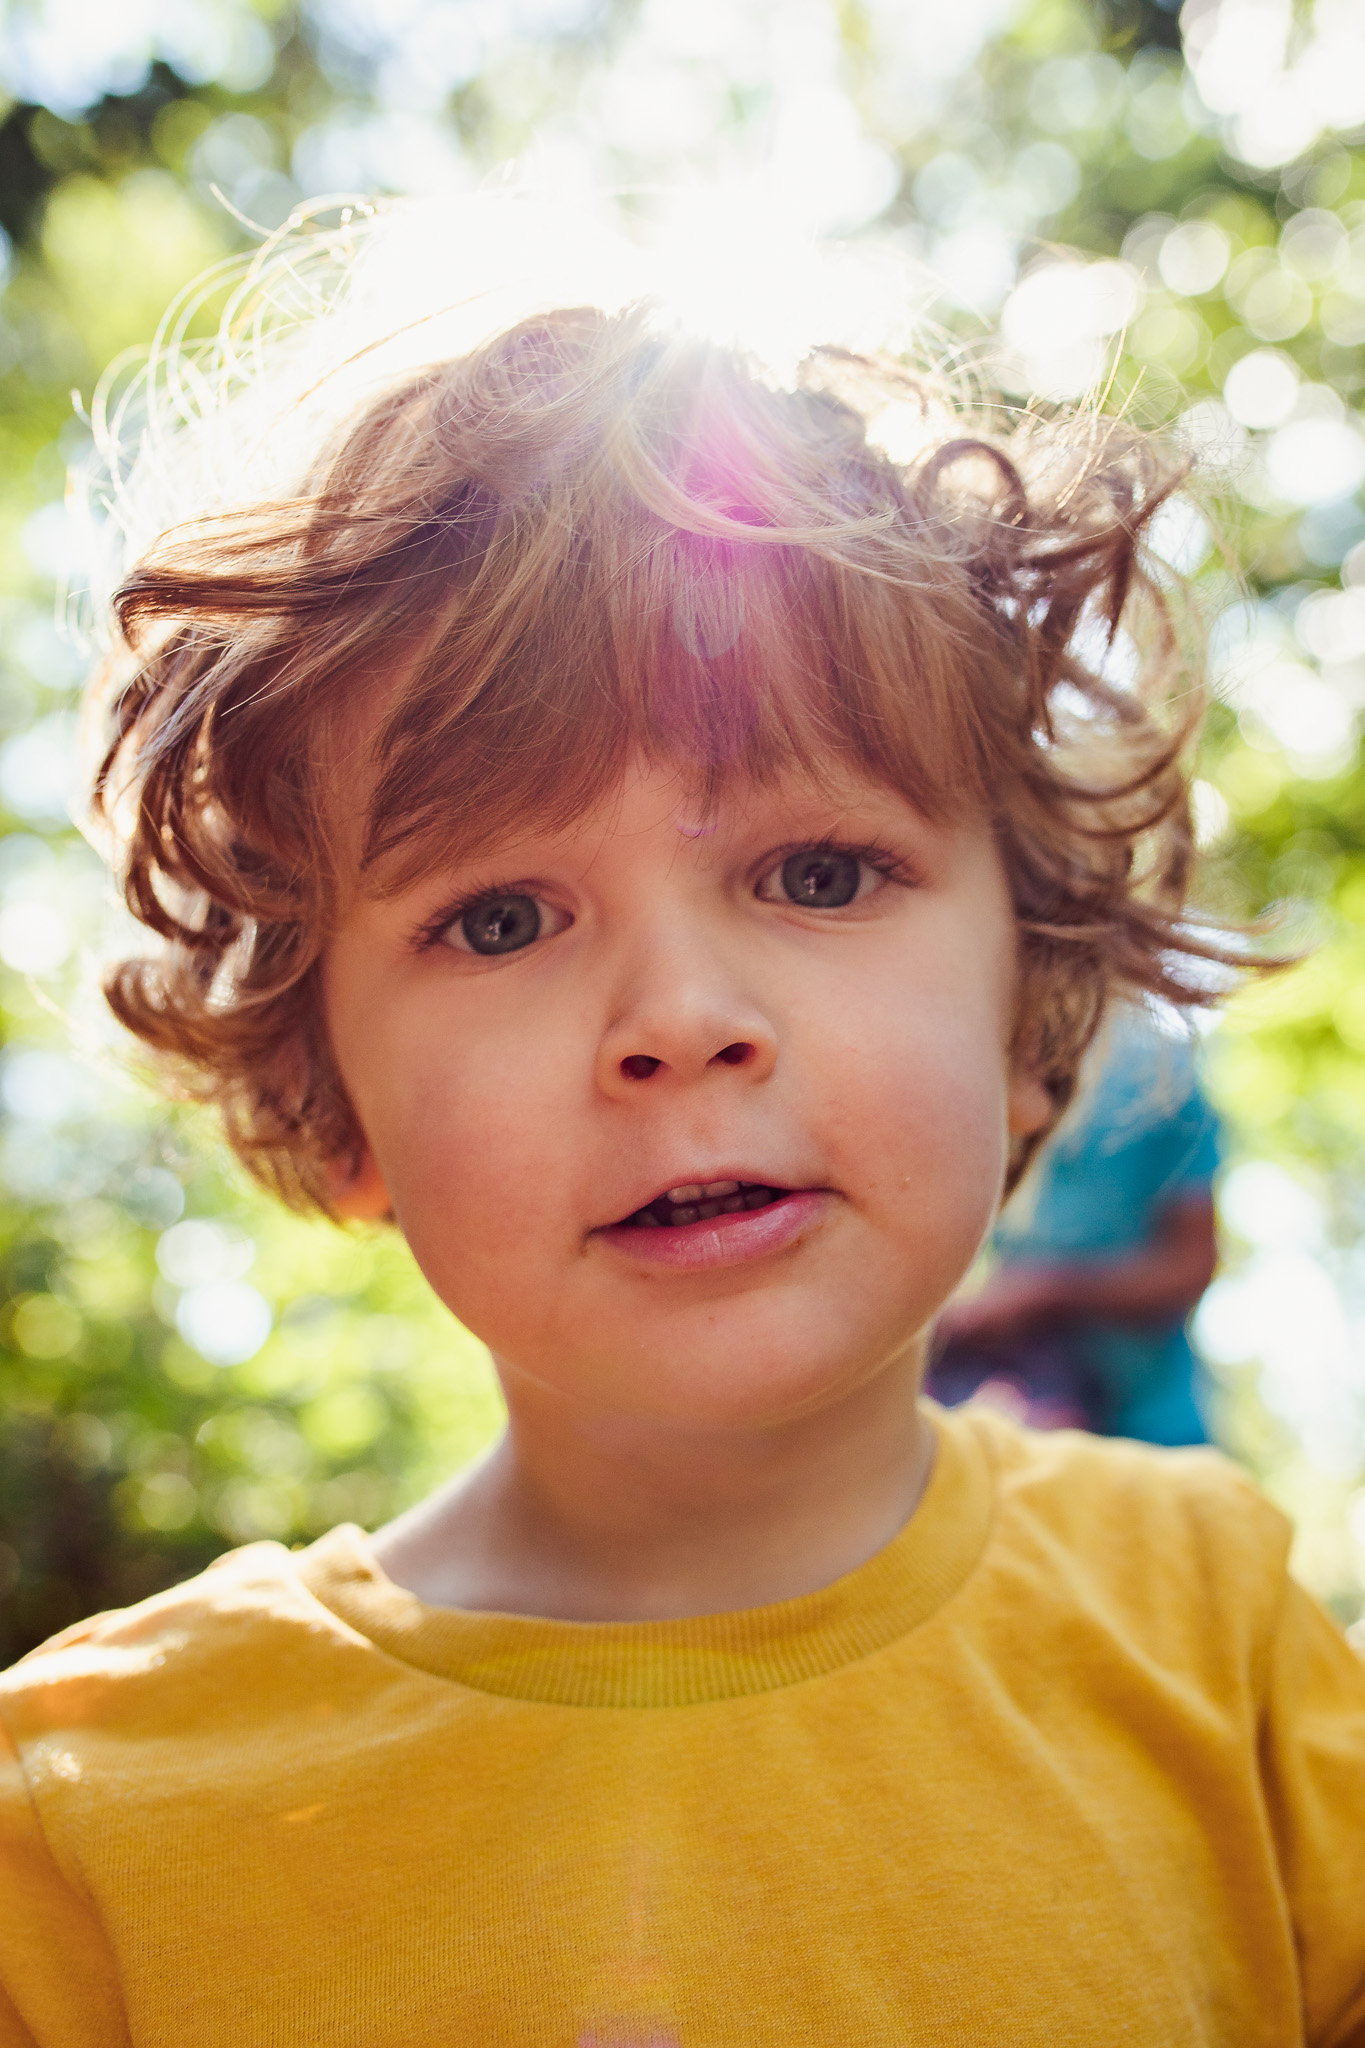 Leo wearing a yellow t-shirt with a sun flare behind his head and looking straight ahead during a family photo session.